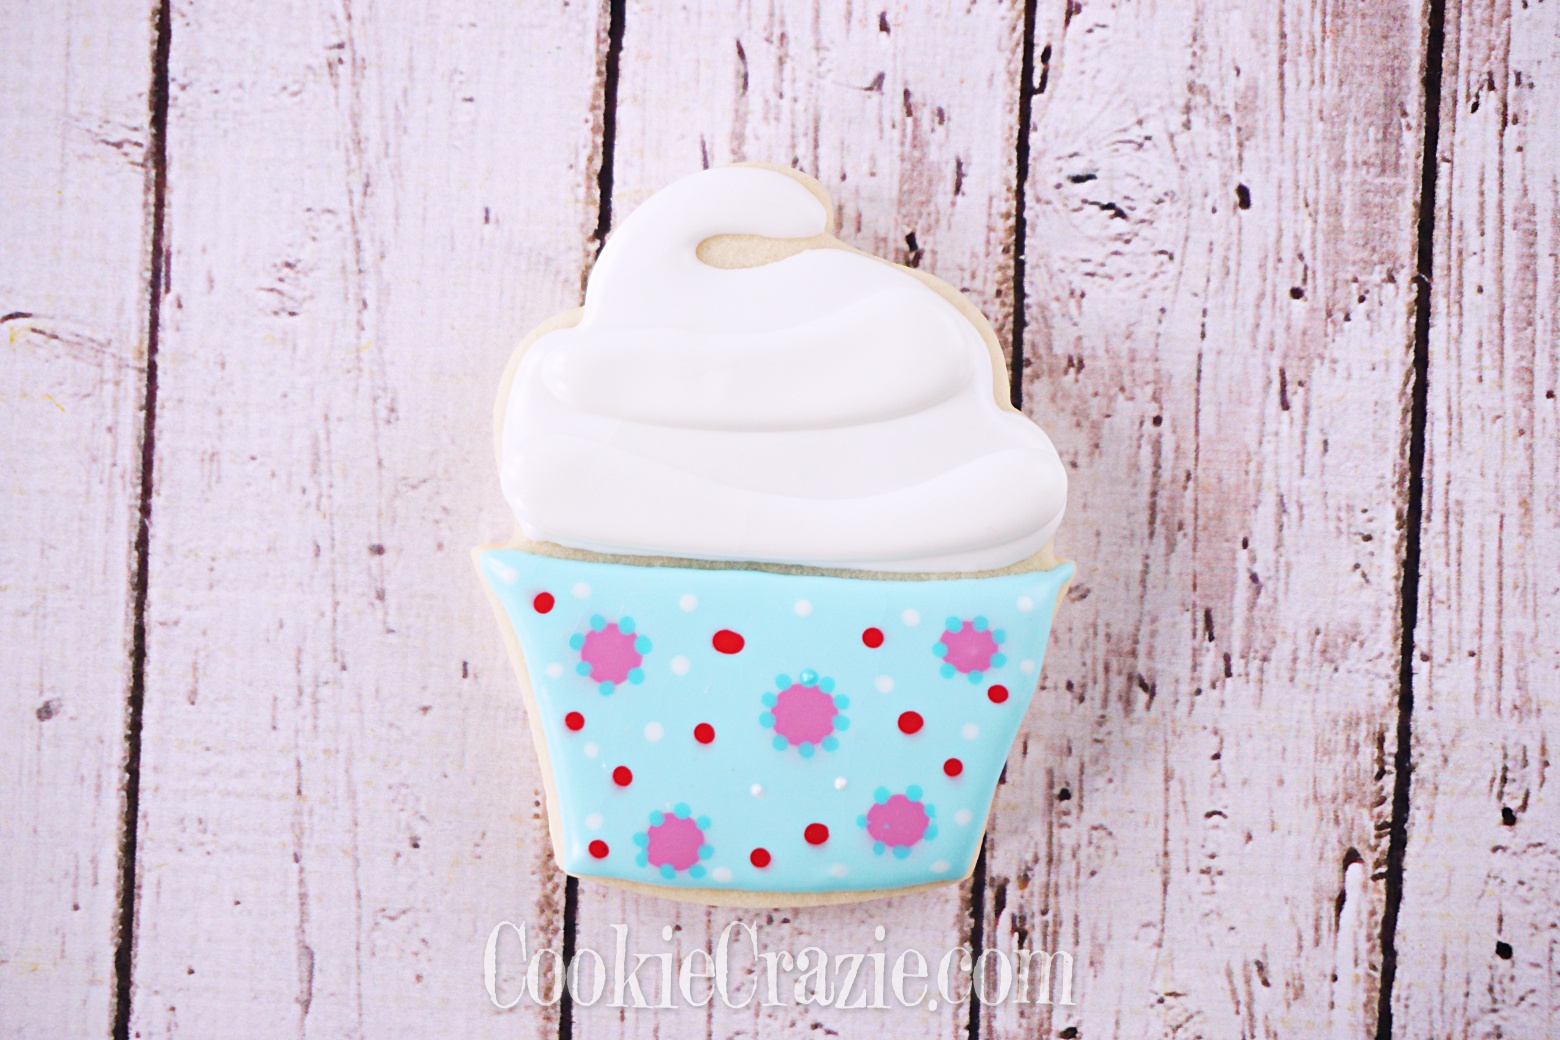  Cupcake with Sleeve Decorated Sugar Cookie YouTube video  HERE  